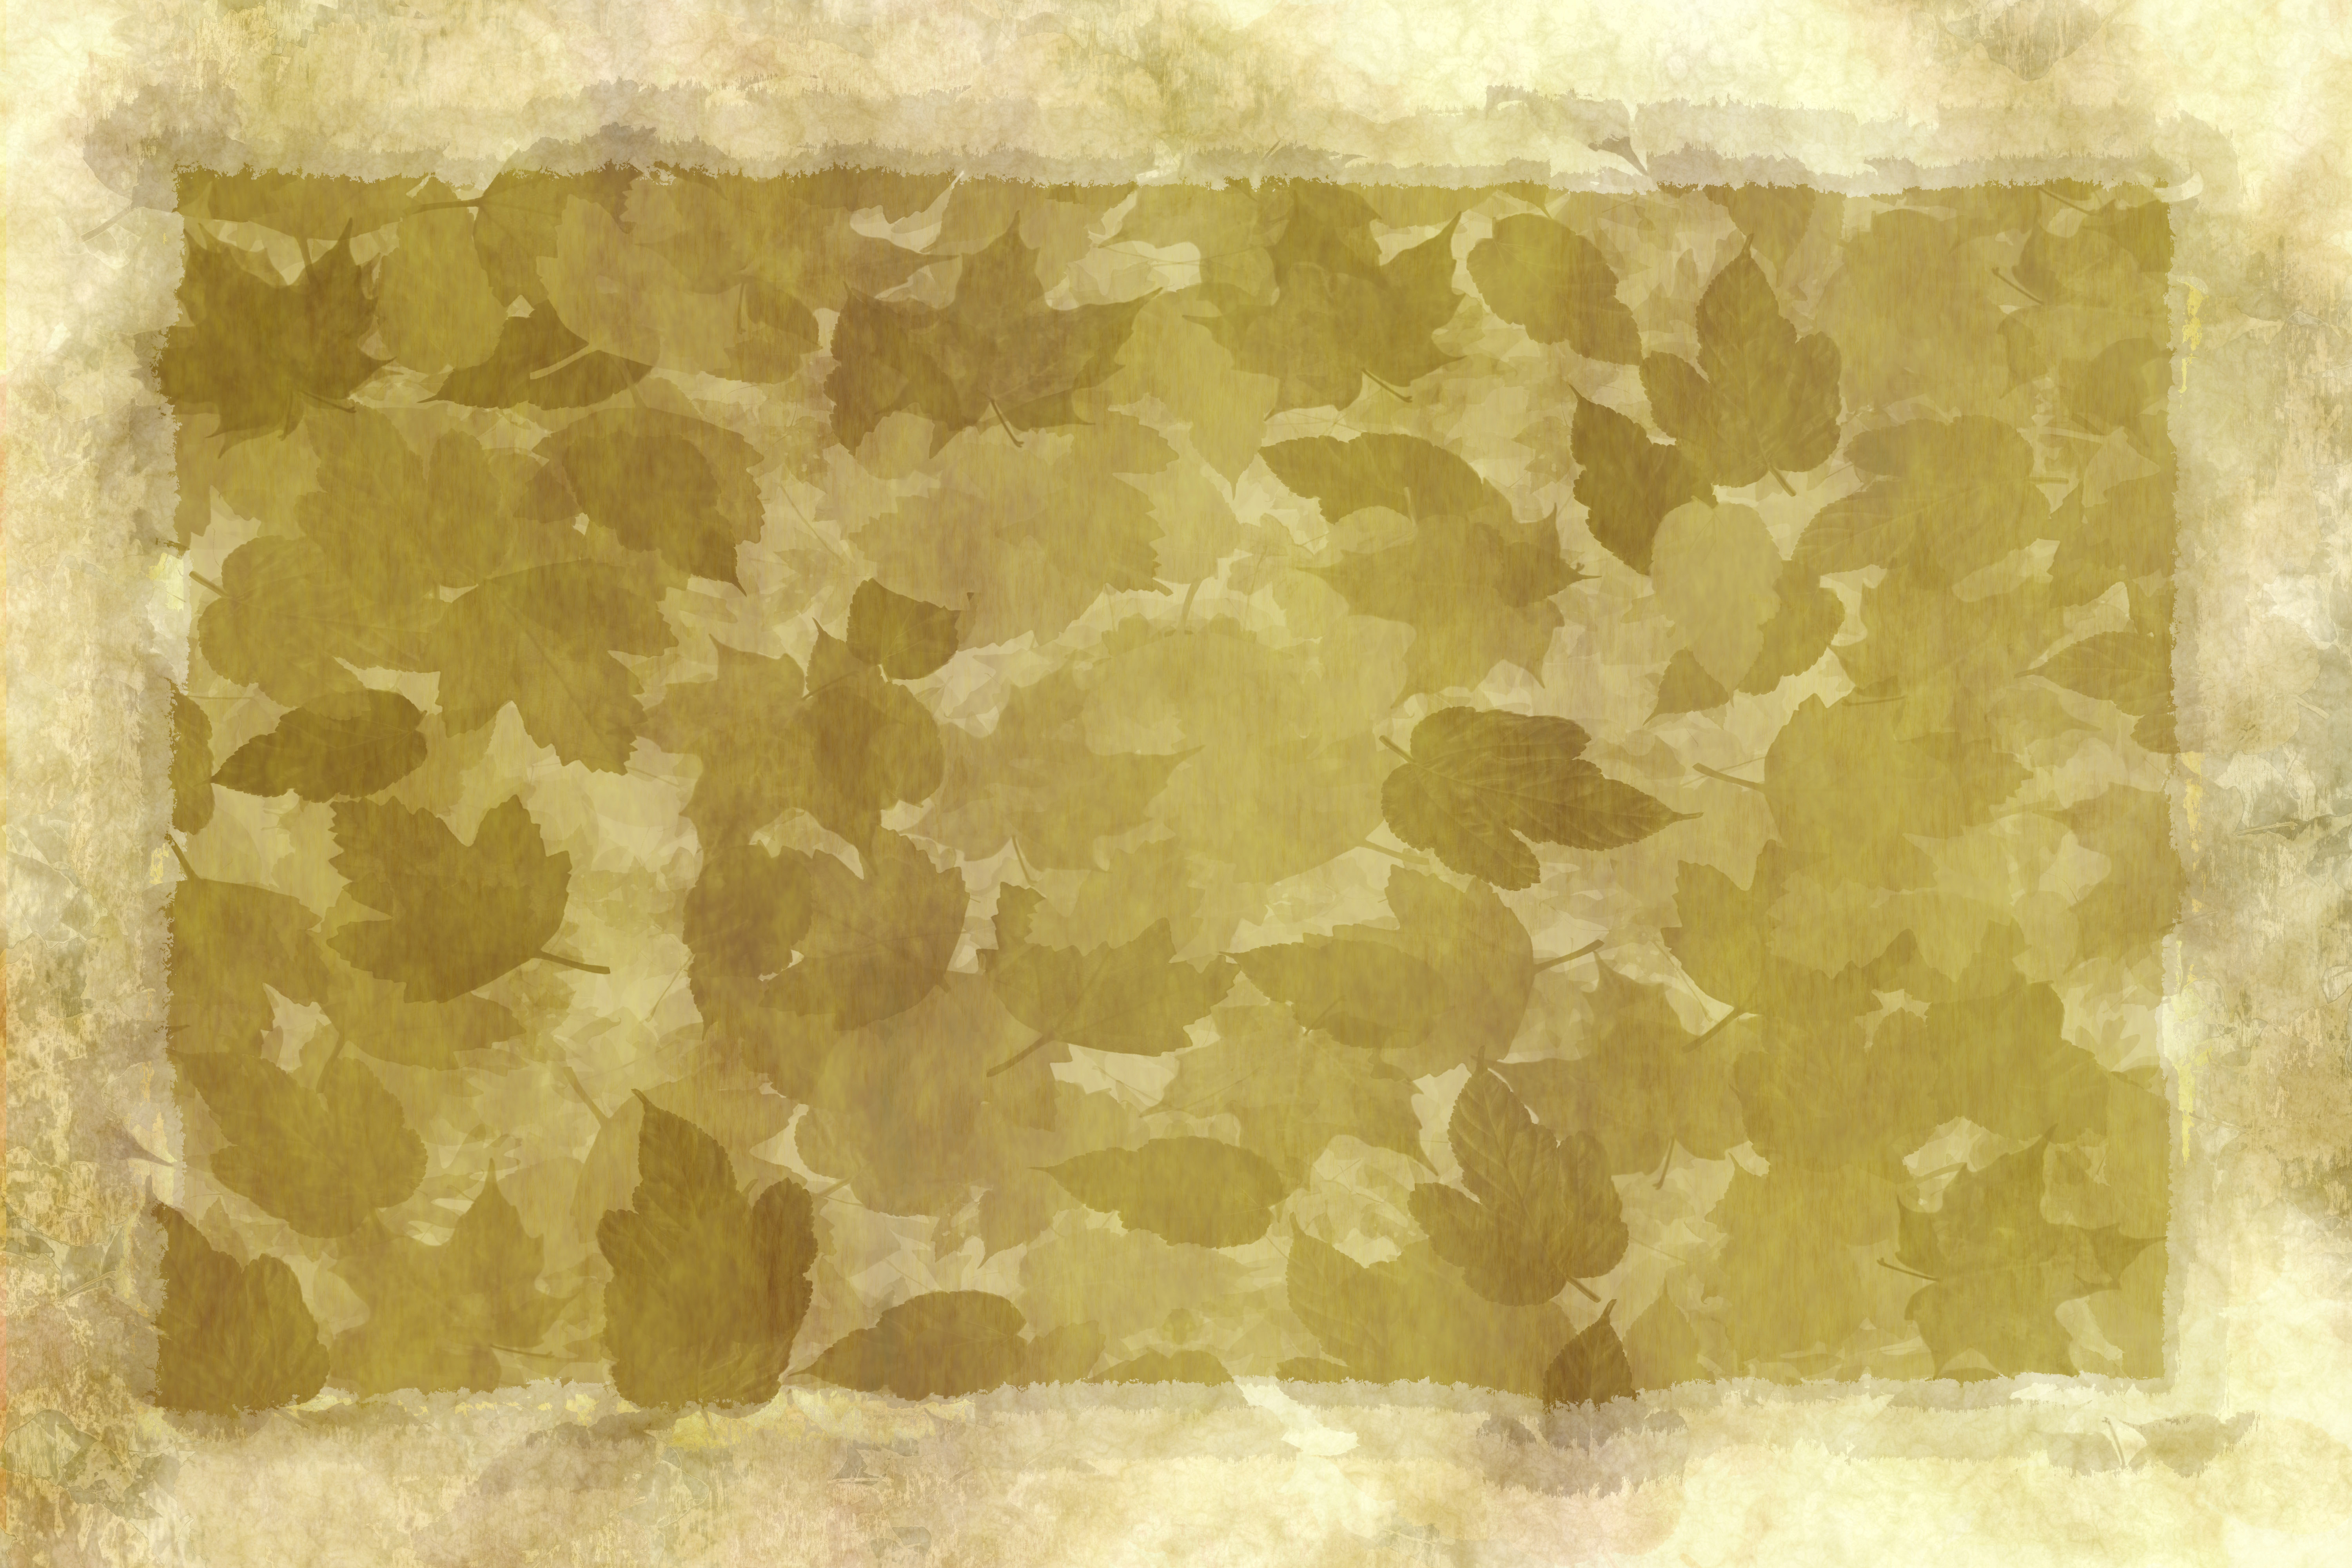 grunge leaves abstract old parchment paper | www.myfreetextures.com | Free Textures, Photos ...